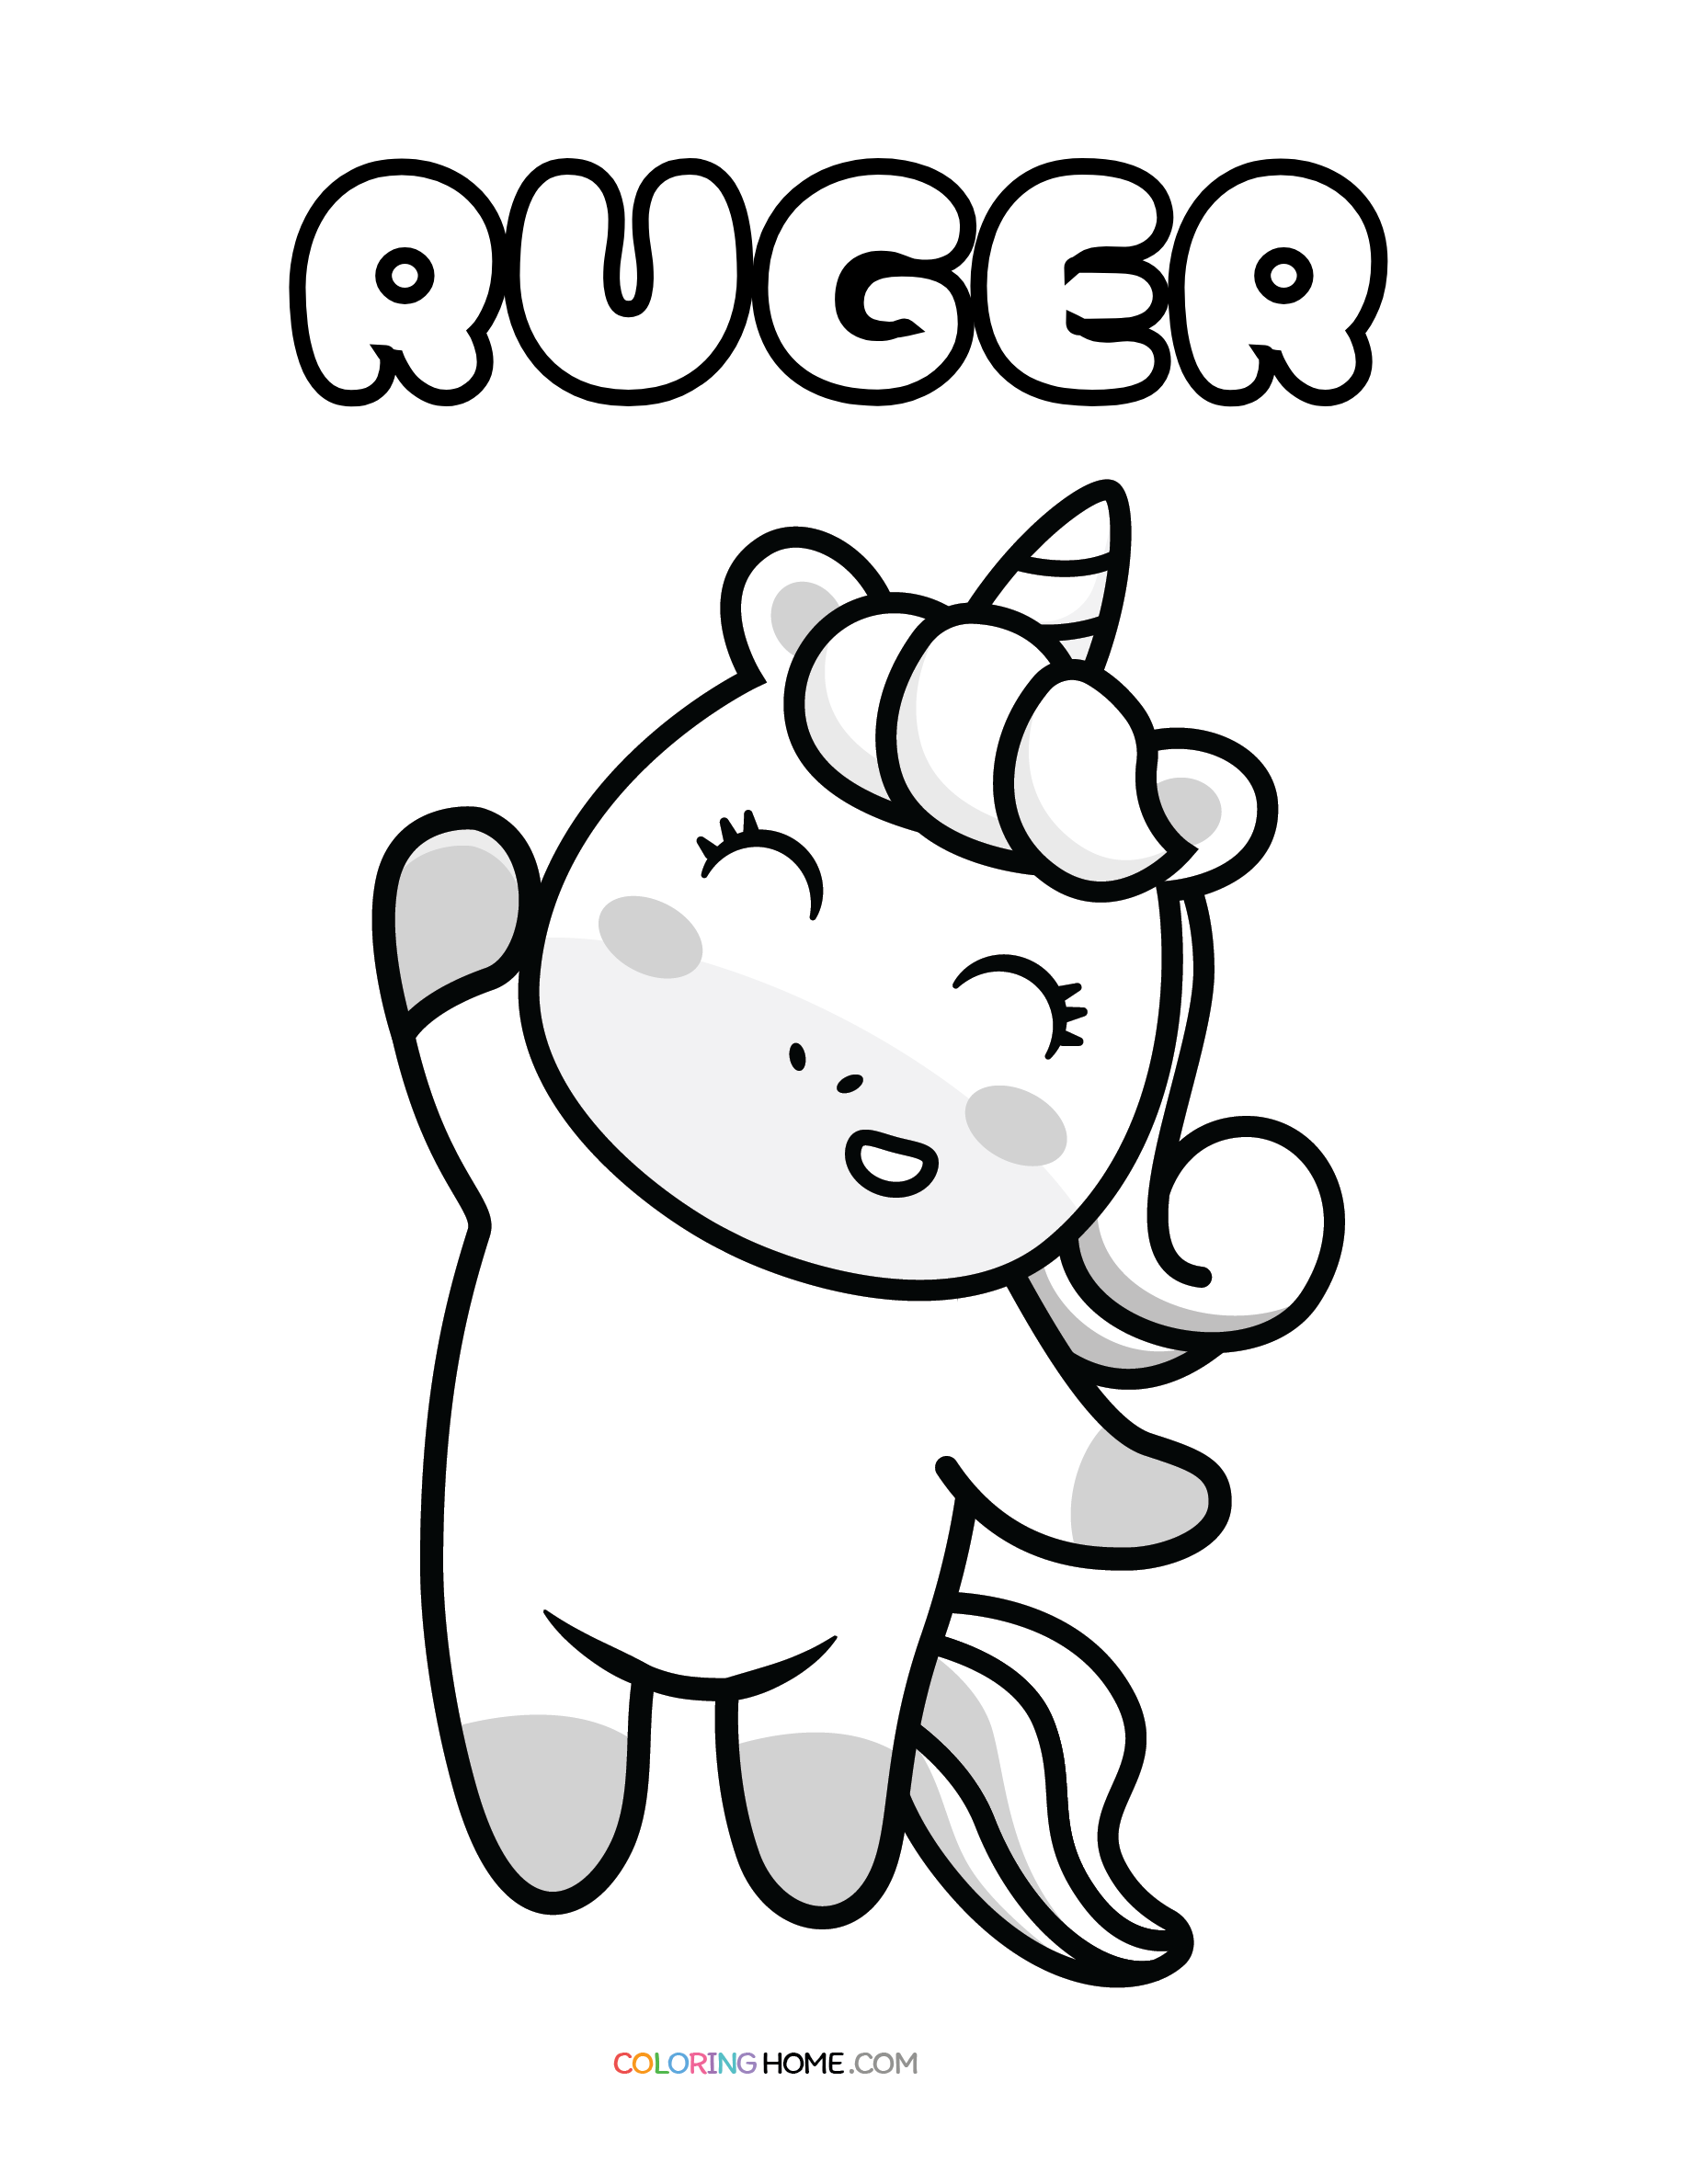 Ruger unicorn coloring page